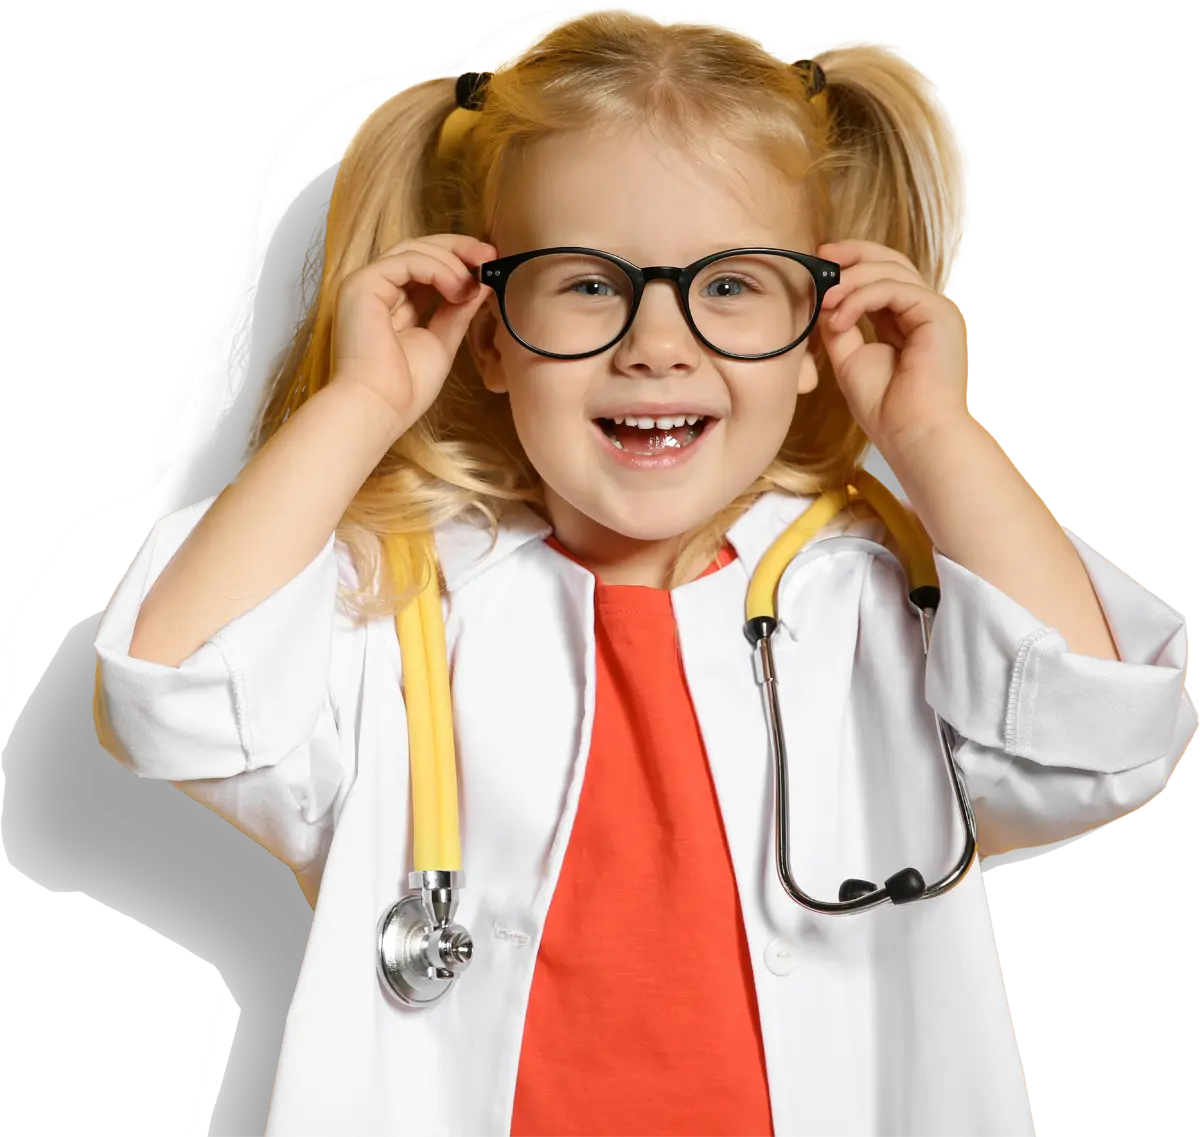 Smiling young child dressed as a doctor with glasses and stethoscope.